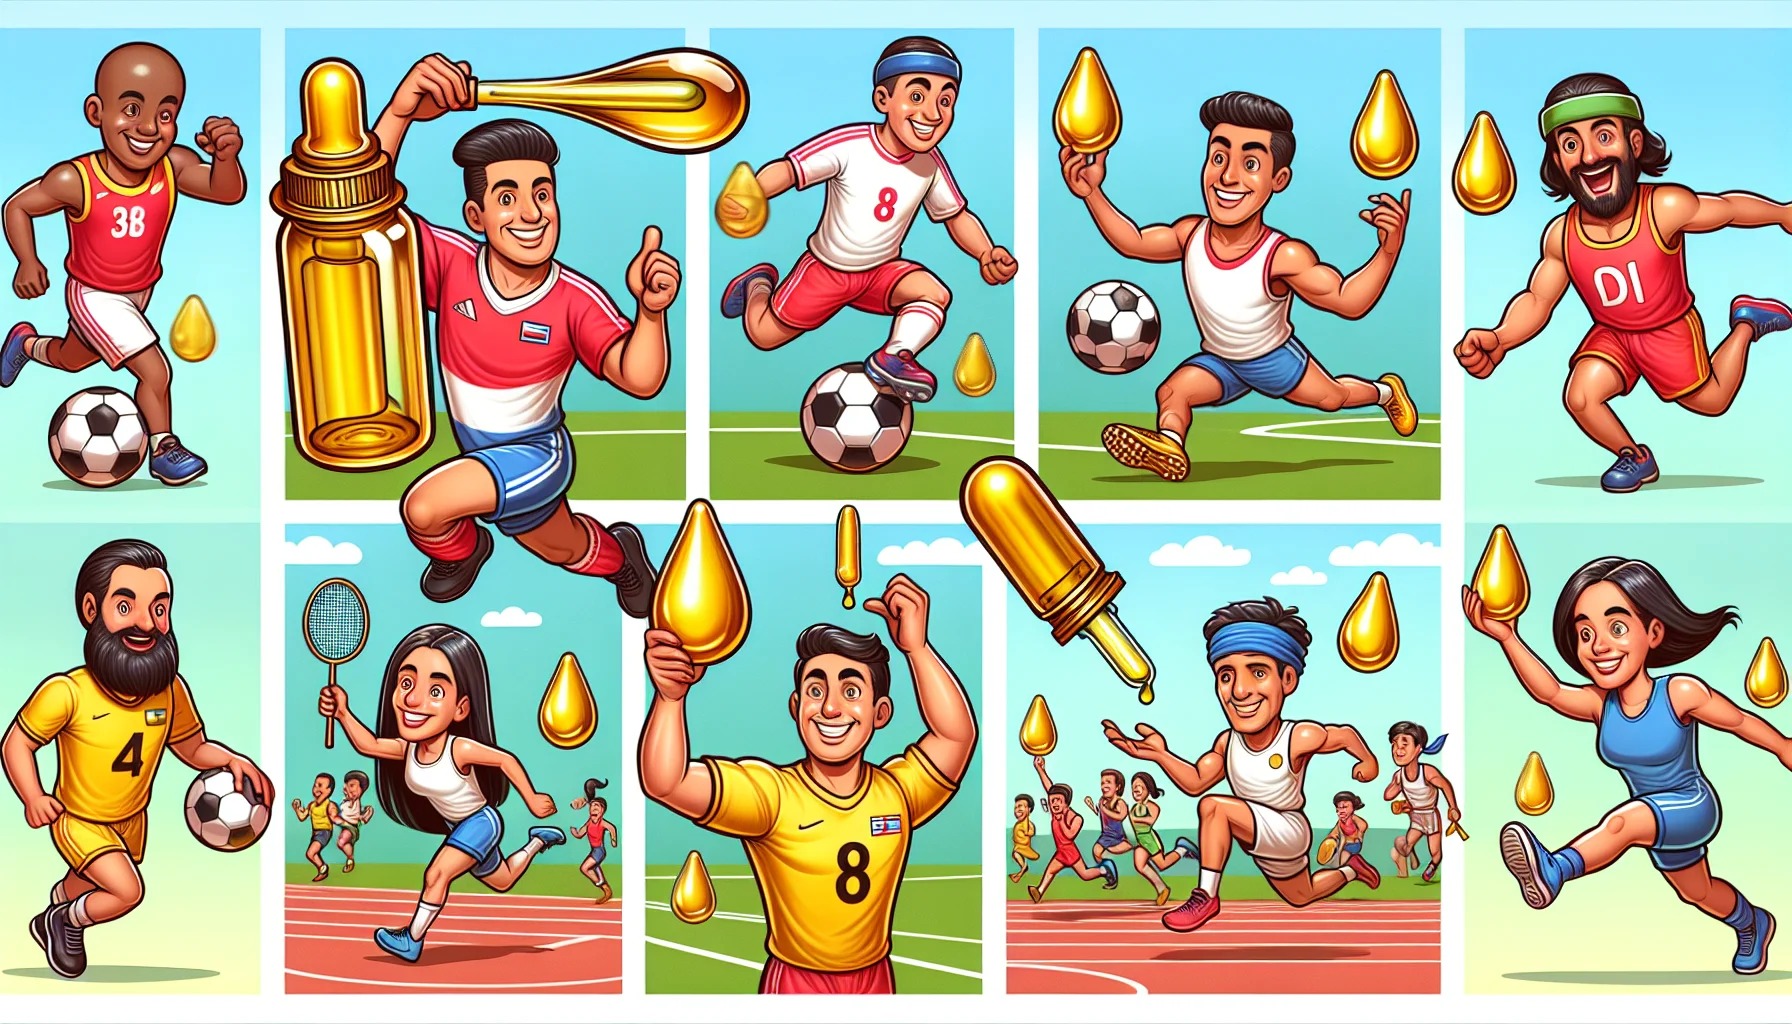 Create a comical scene depicting a vivid and lively sports day events. There are athletes of different descents- Hispanic, Middle-Eastern, South Asian - and genders, both male and female, engaged in various sports like soccer, badminton and marathon running, but they each have one thing common: they're all animatedly using or holding symbolic golden drops of Vitamin D oil in various funny ways. Maybe one is using it as a secret weapon in a soccer match, another is balancing a dropper on their nose. Let the Vitamin D oil shine with a glow that symbolizes its importance for physical well-being in sports.